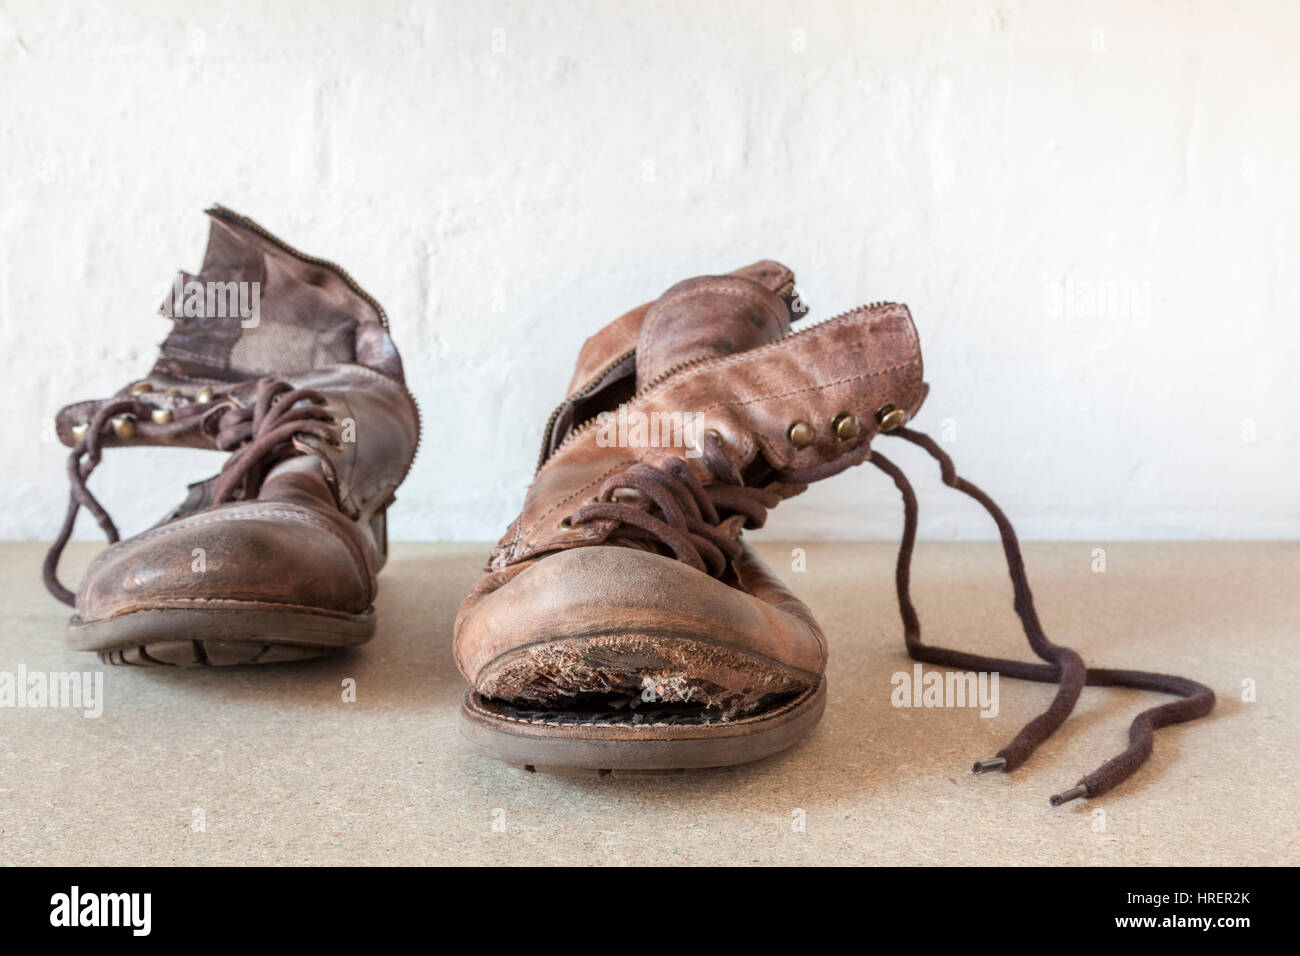 Pair of worn out old boots, one boot with the sole coming off Stock Photo